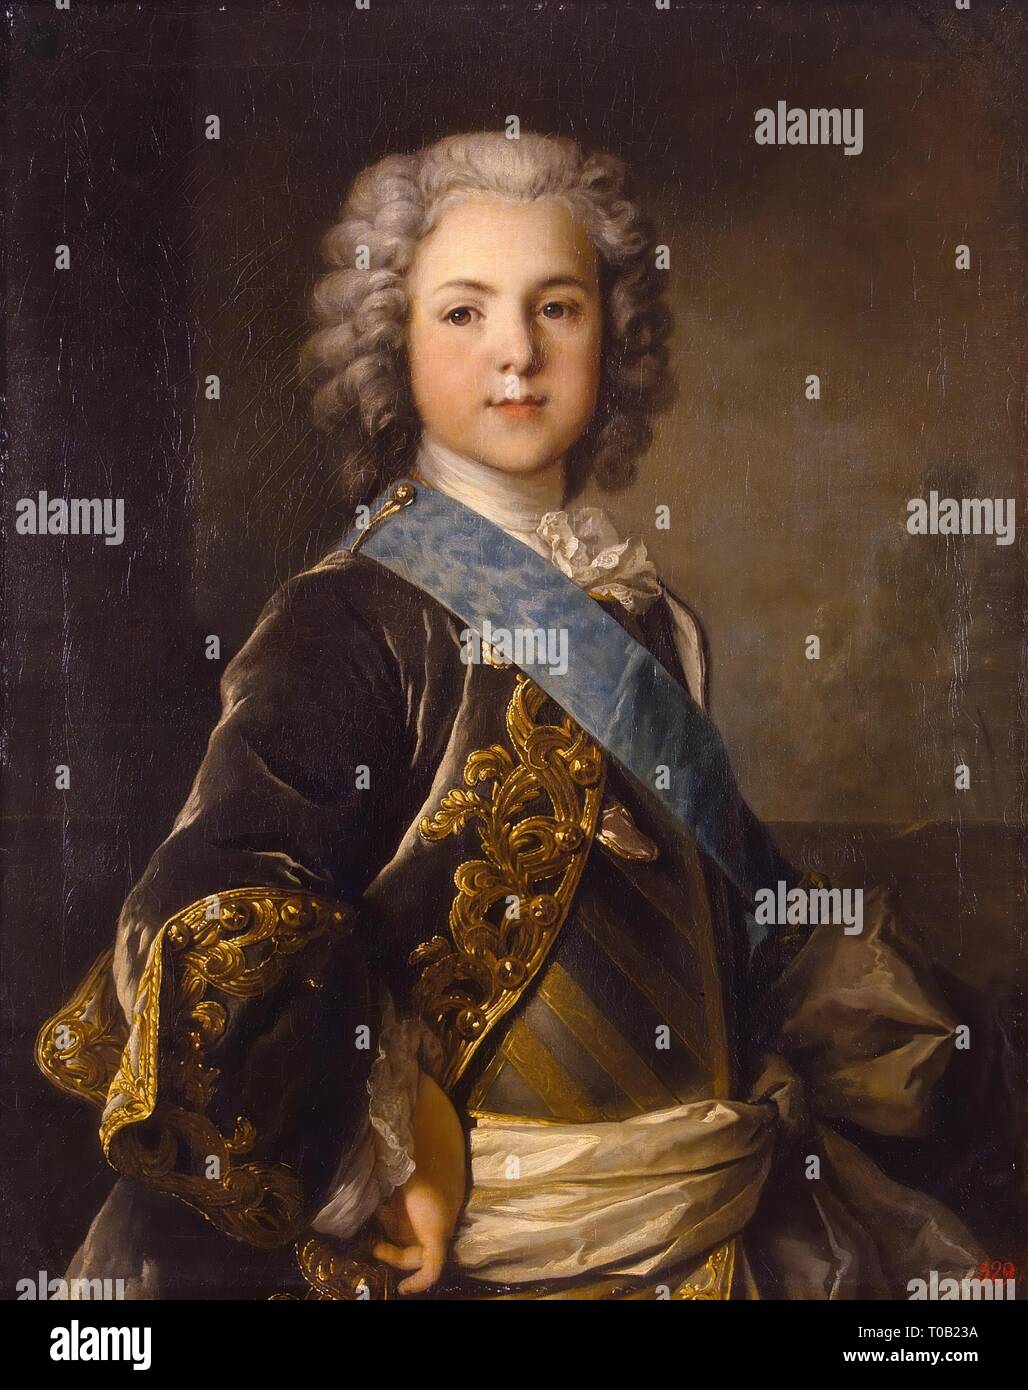 'Portrait of Louis, Grand Dauphin of France'. France, 1739. Dimensions: 80x64 cm. Museum: State Hermitage, St. Petersburg. Author: LOUIS TOCQUE. Stock Photo